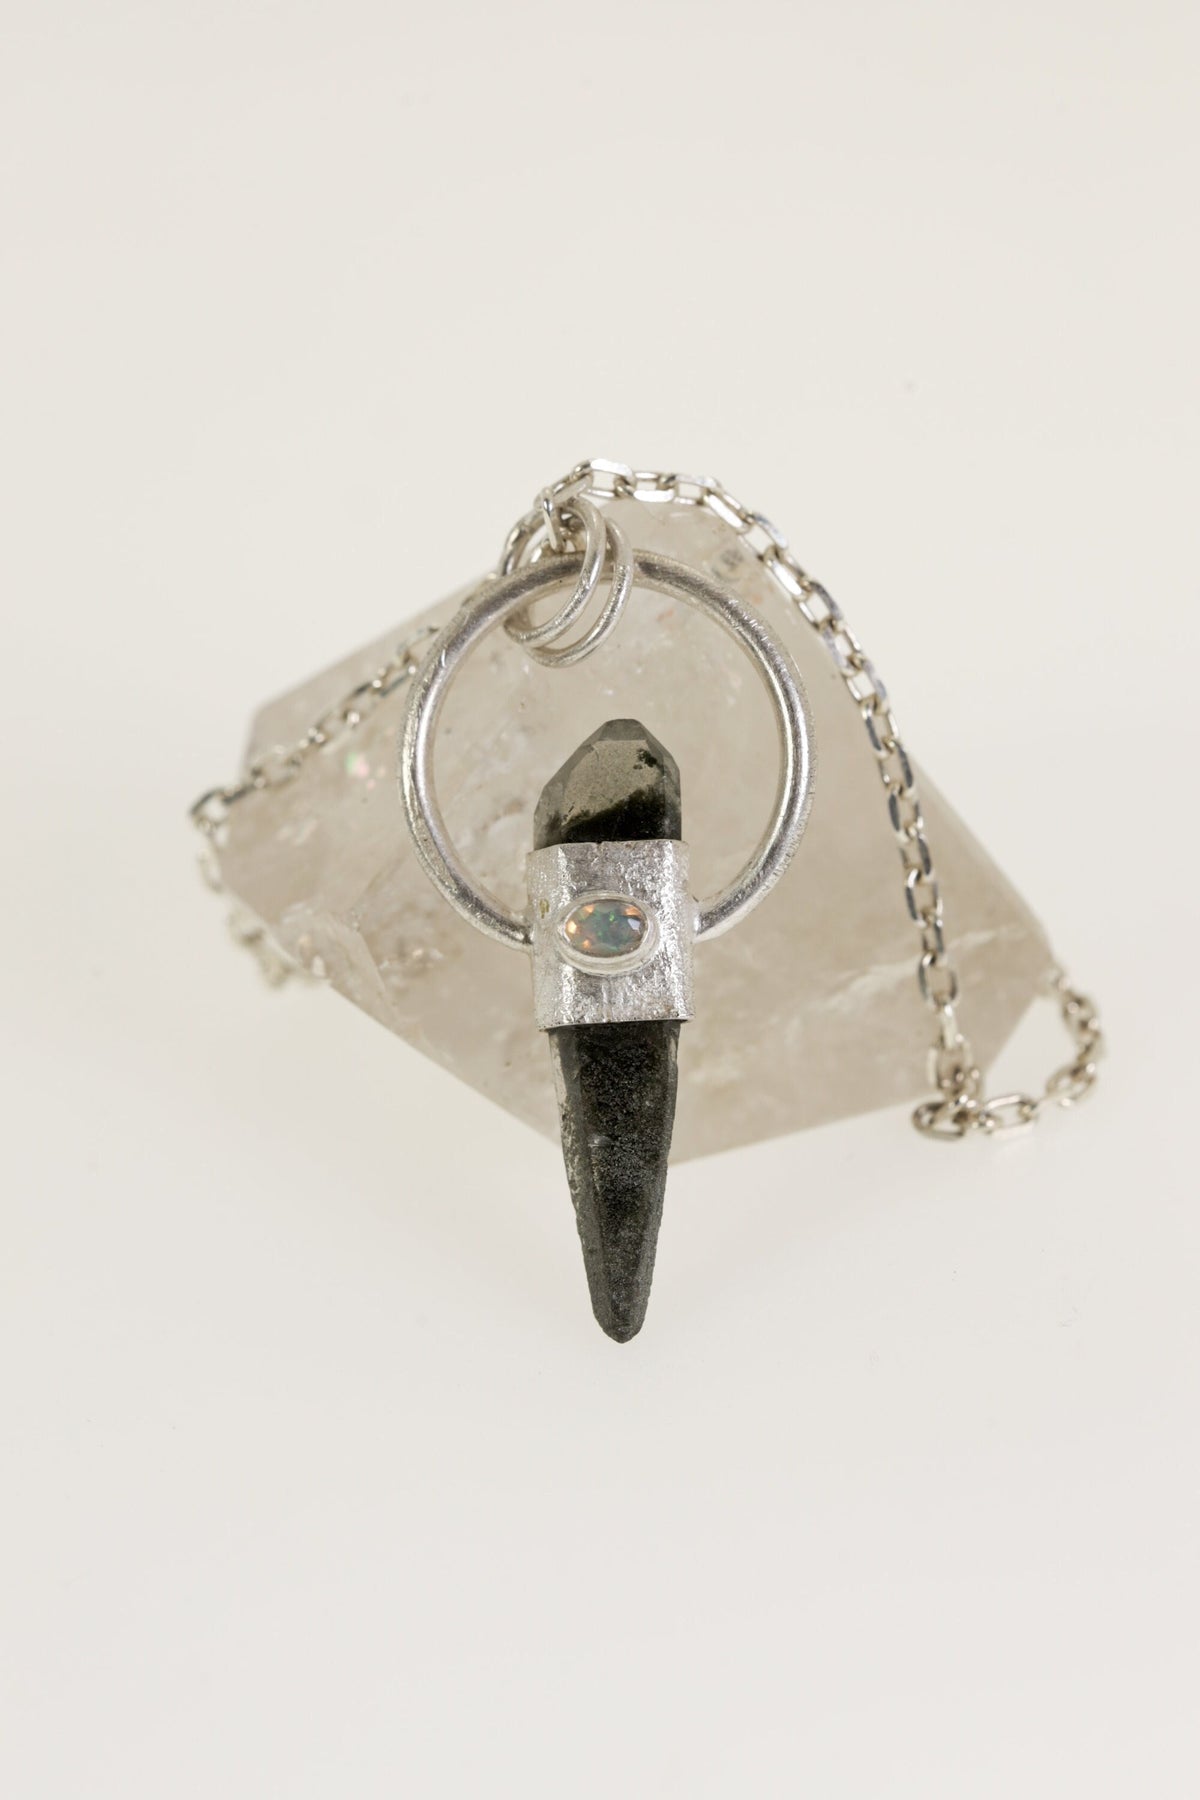 Verdant Vision: Sterling Silver Sand-Textured Crystal Pendant with Double Terminated Himalayan Chlorite Quartz and Faceted Opal